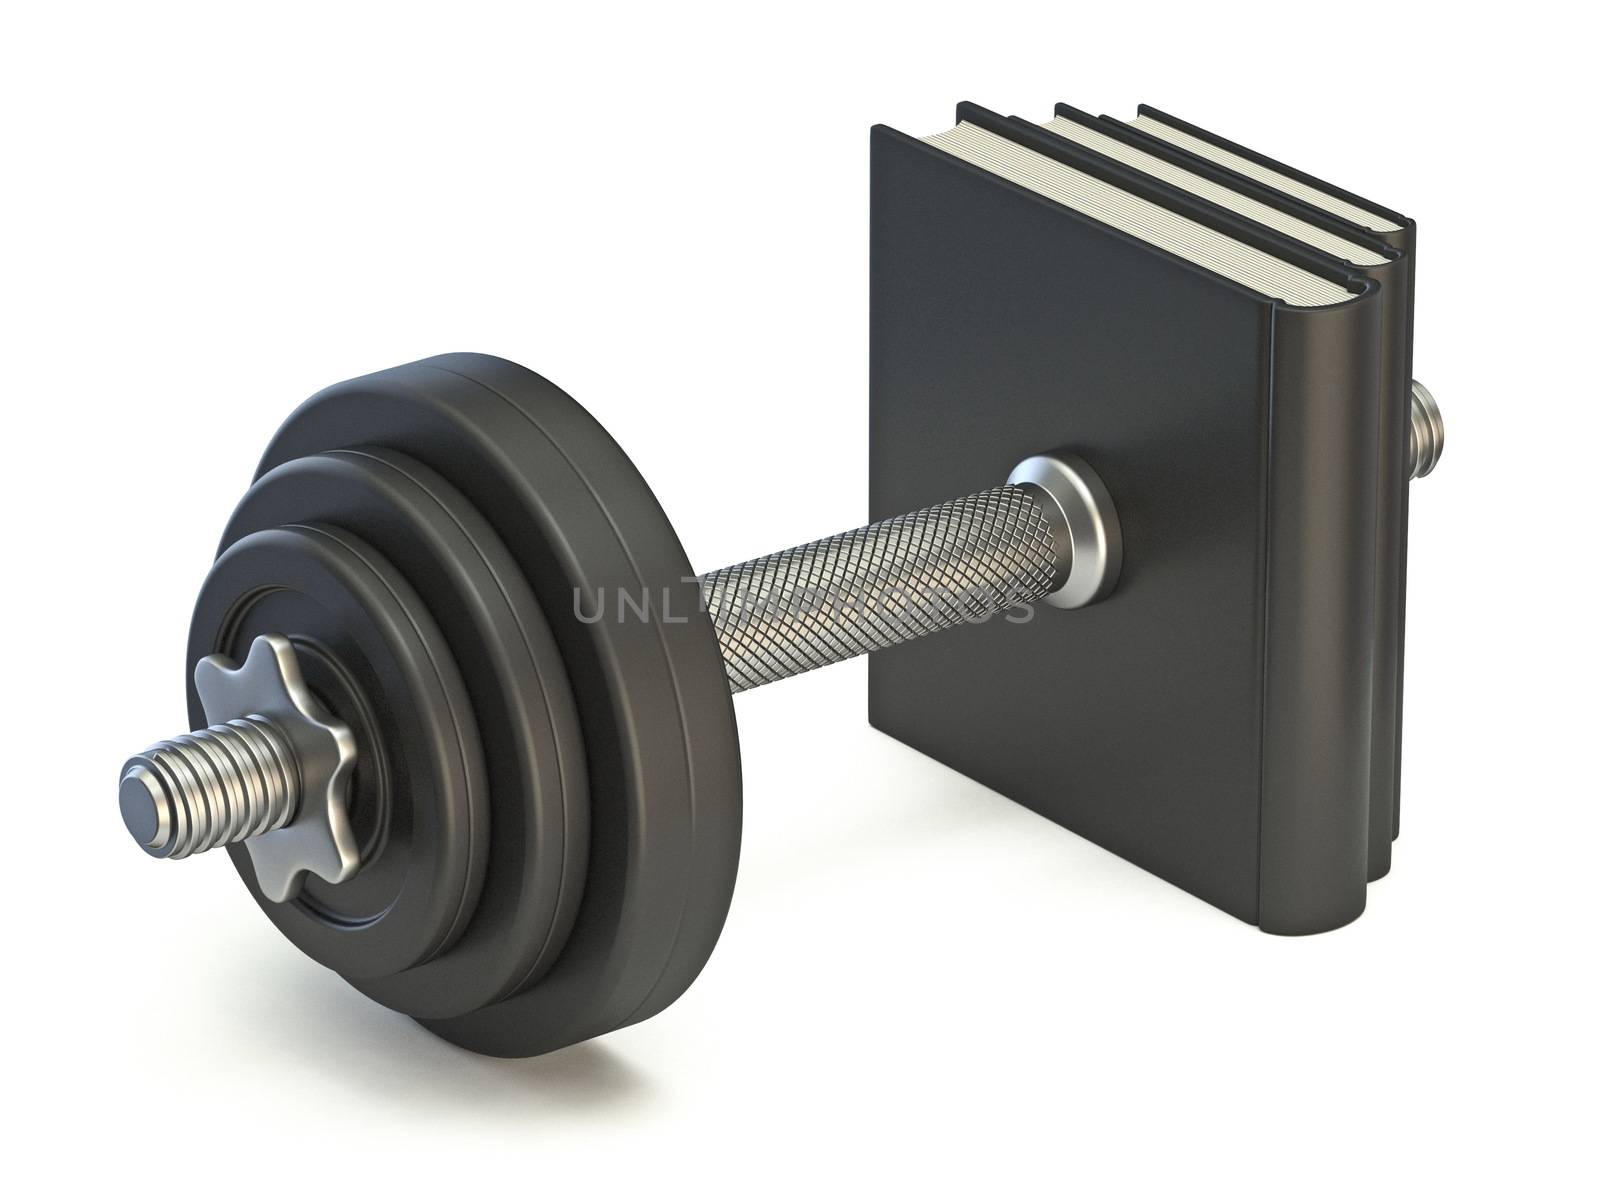 Dumbbell made from stack of books 3D render illustration isolated on white background